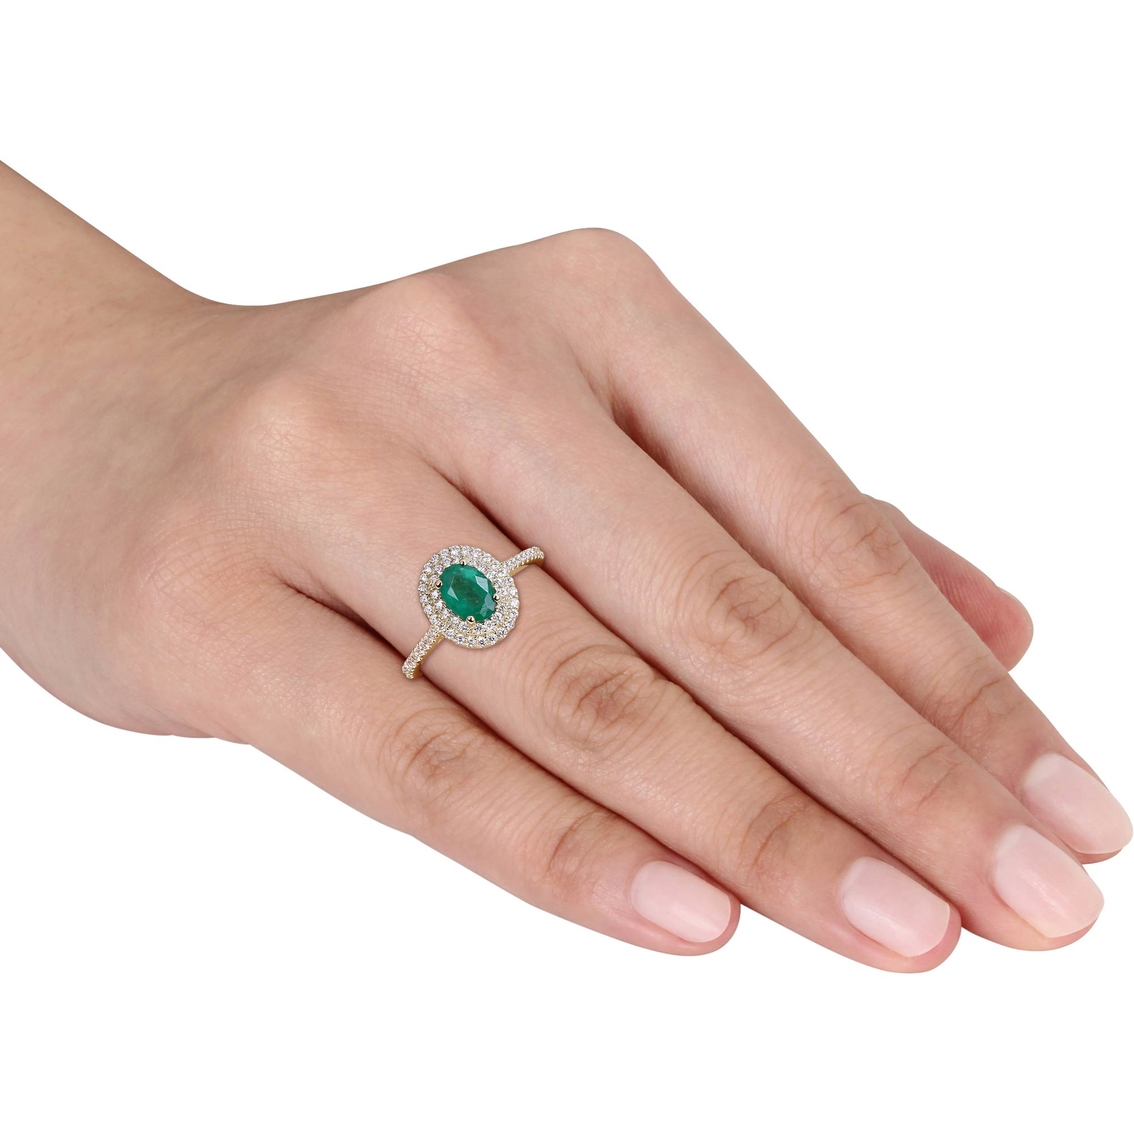 Sofia B. 14K Yellow Gold Oval Cut Emerald and 1/3 CTW Diamond Double Halo Ring - Image 4 of 4